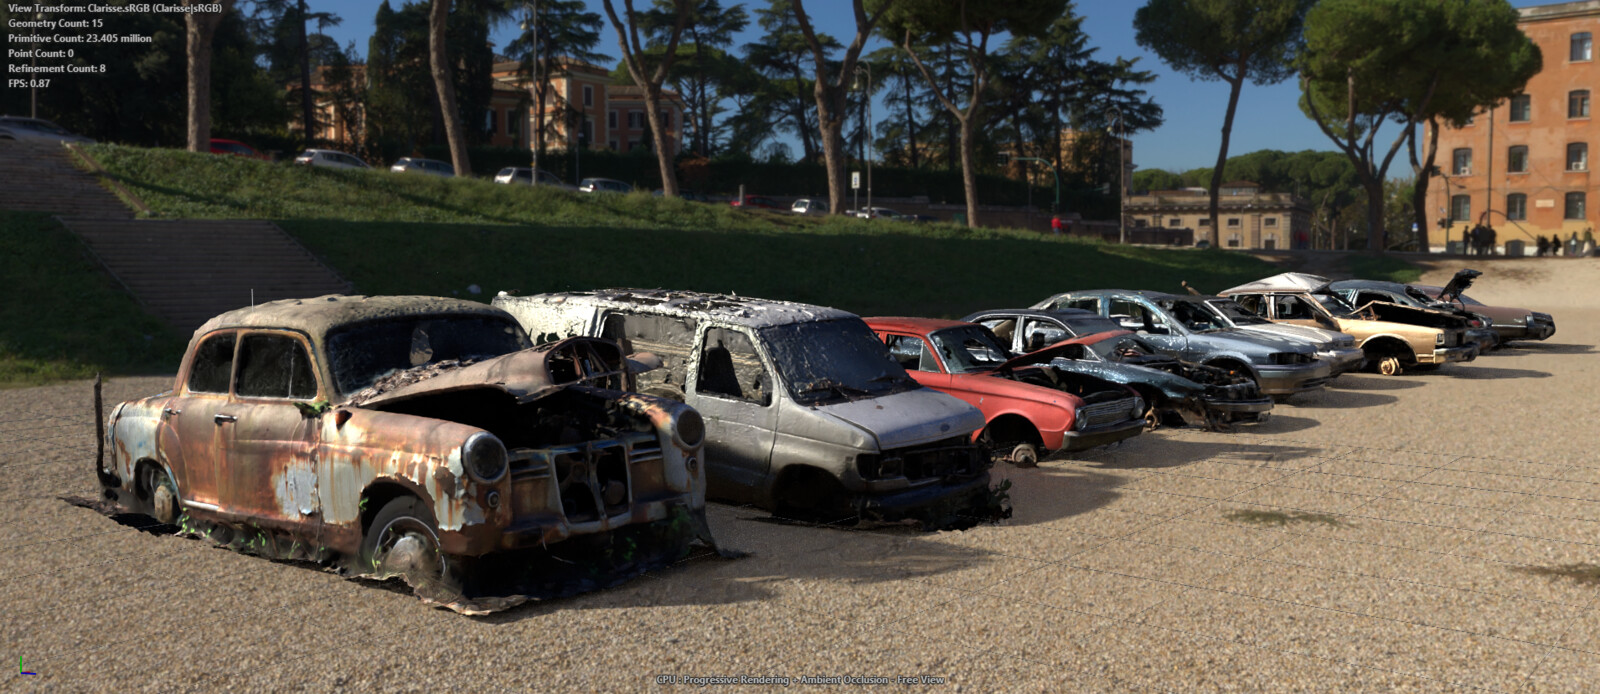 I had seen another Clarisse users work, referencing a free scan of a junkyard car on Sketchfab. I found that Renafox produces a BUNCH of free to download OBJ scans of junkyard cars. 